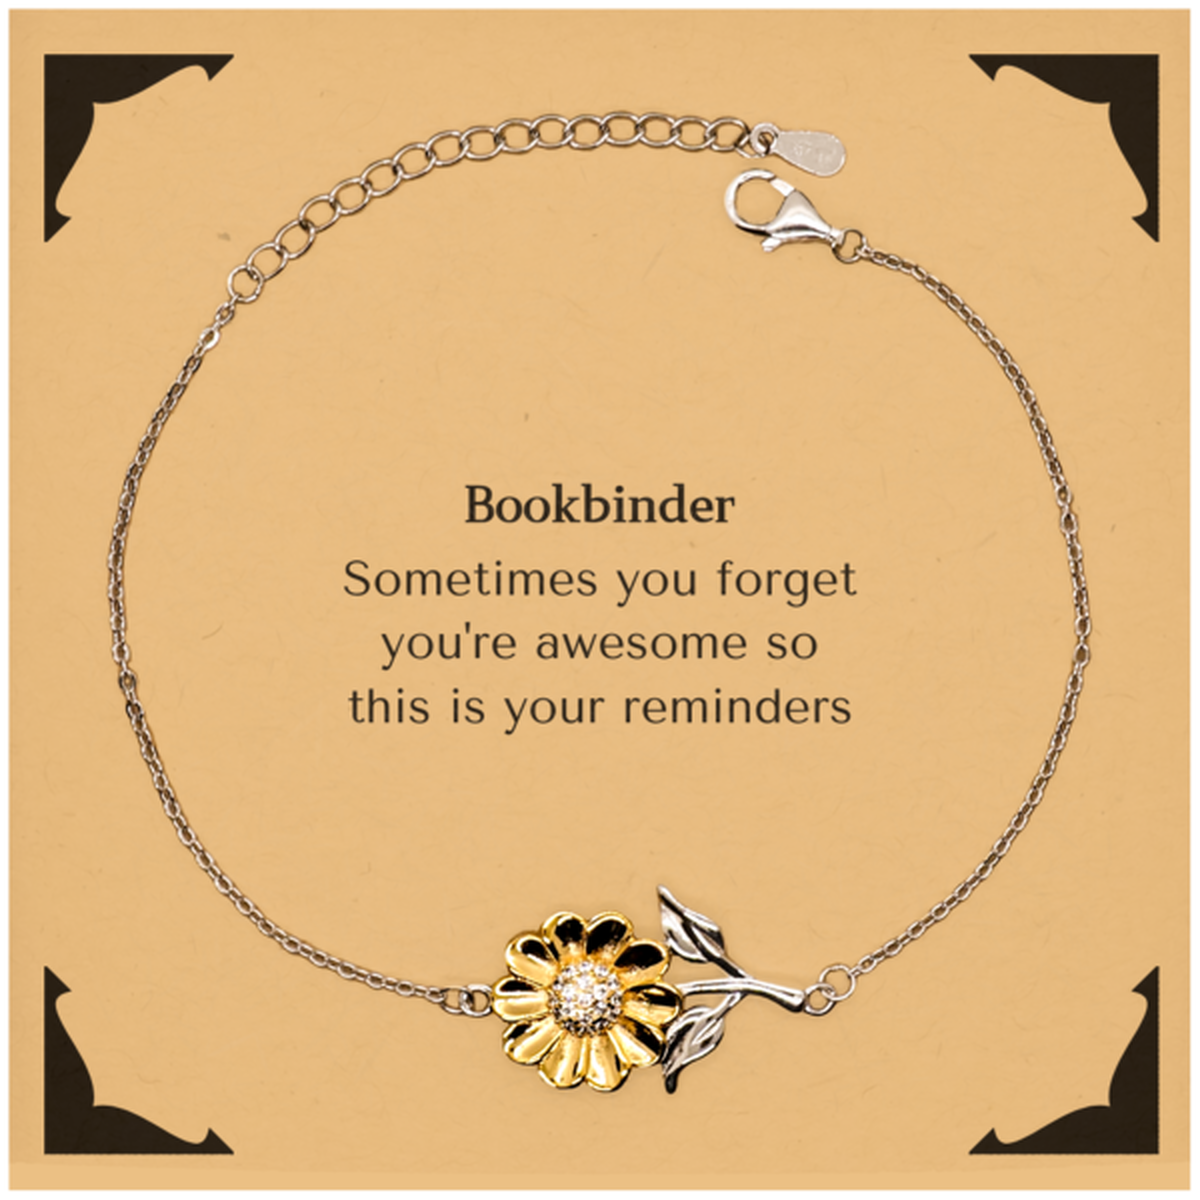 Sentimental Bookbinder Sunflower Bracelet, Bookbinder Sometimes you forget you're awesome so this is your reminders, Graduation Christmas Birthday Gifts for Bookbinder, Men, Women, Coworkers